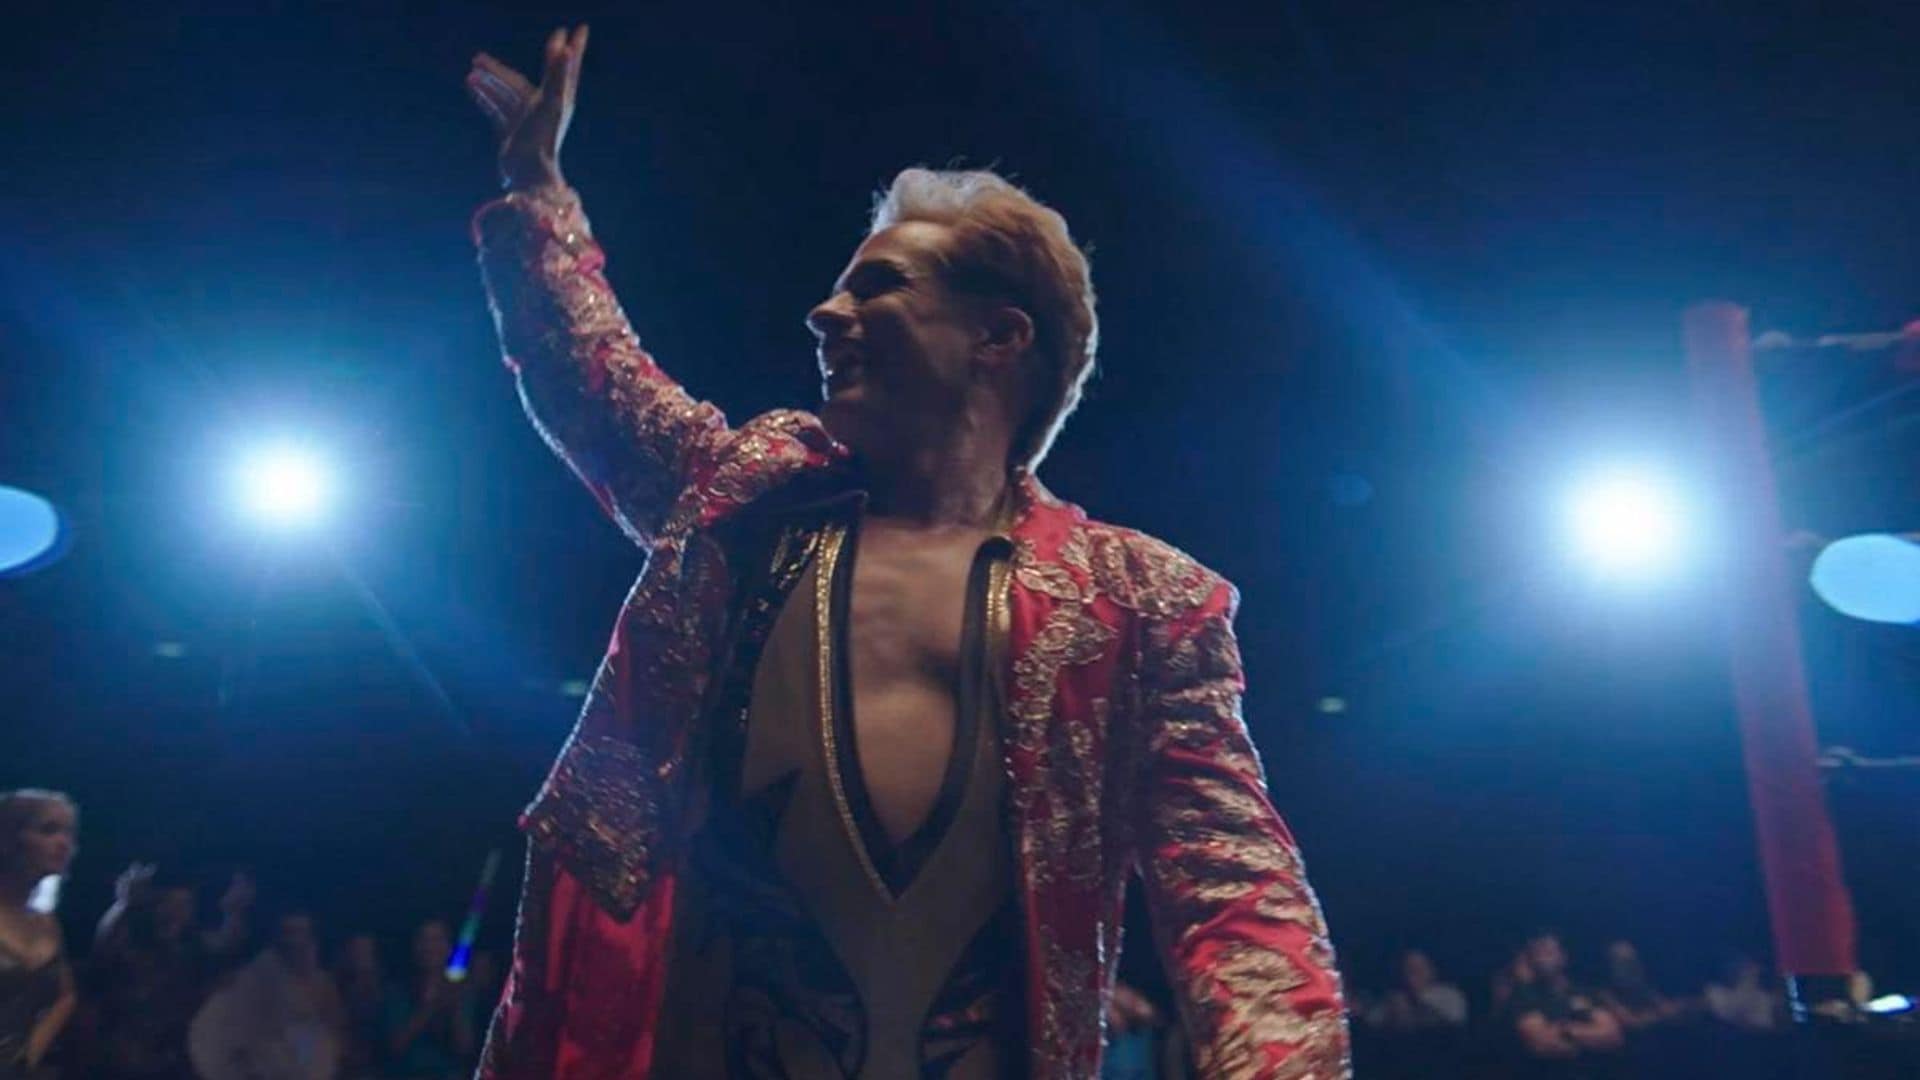 ‘Cassandro’ official trailer: First look at the flamboyant Lucha Libre wrestler